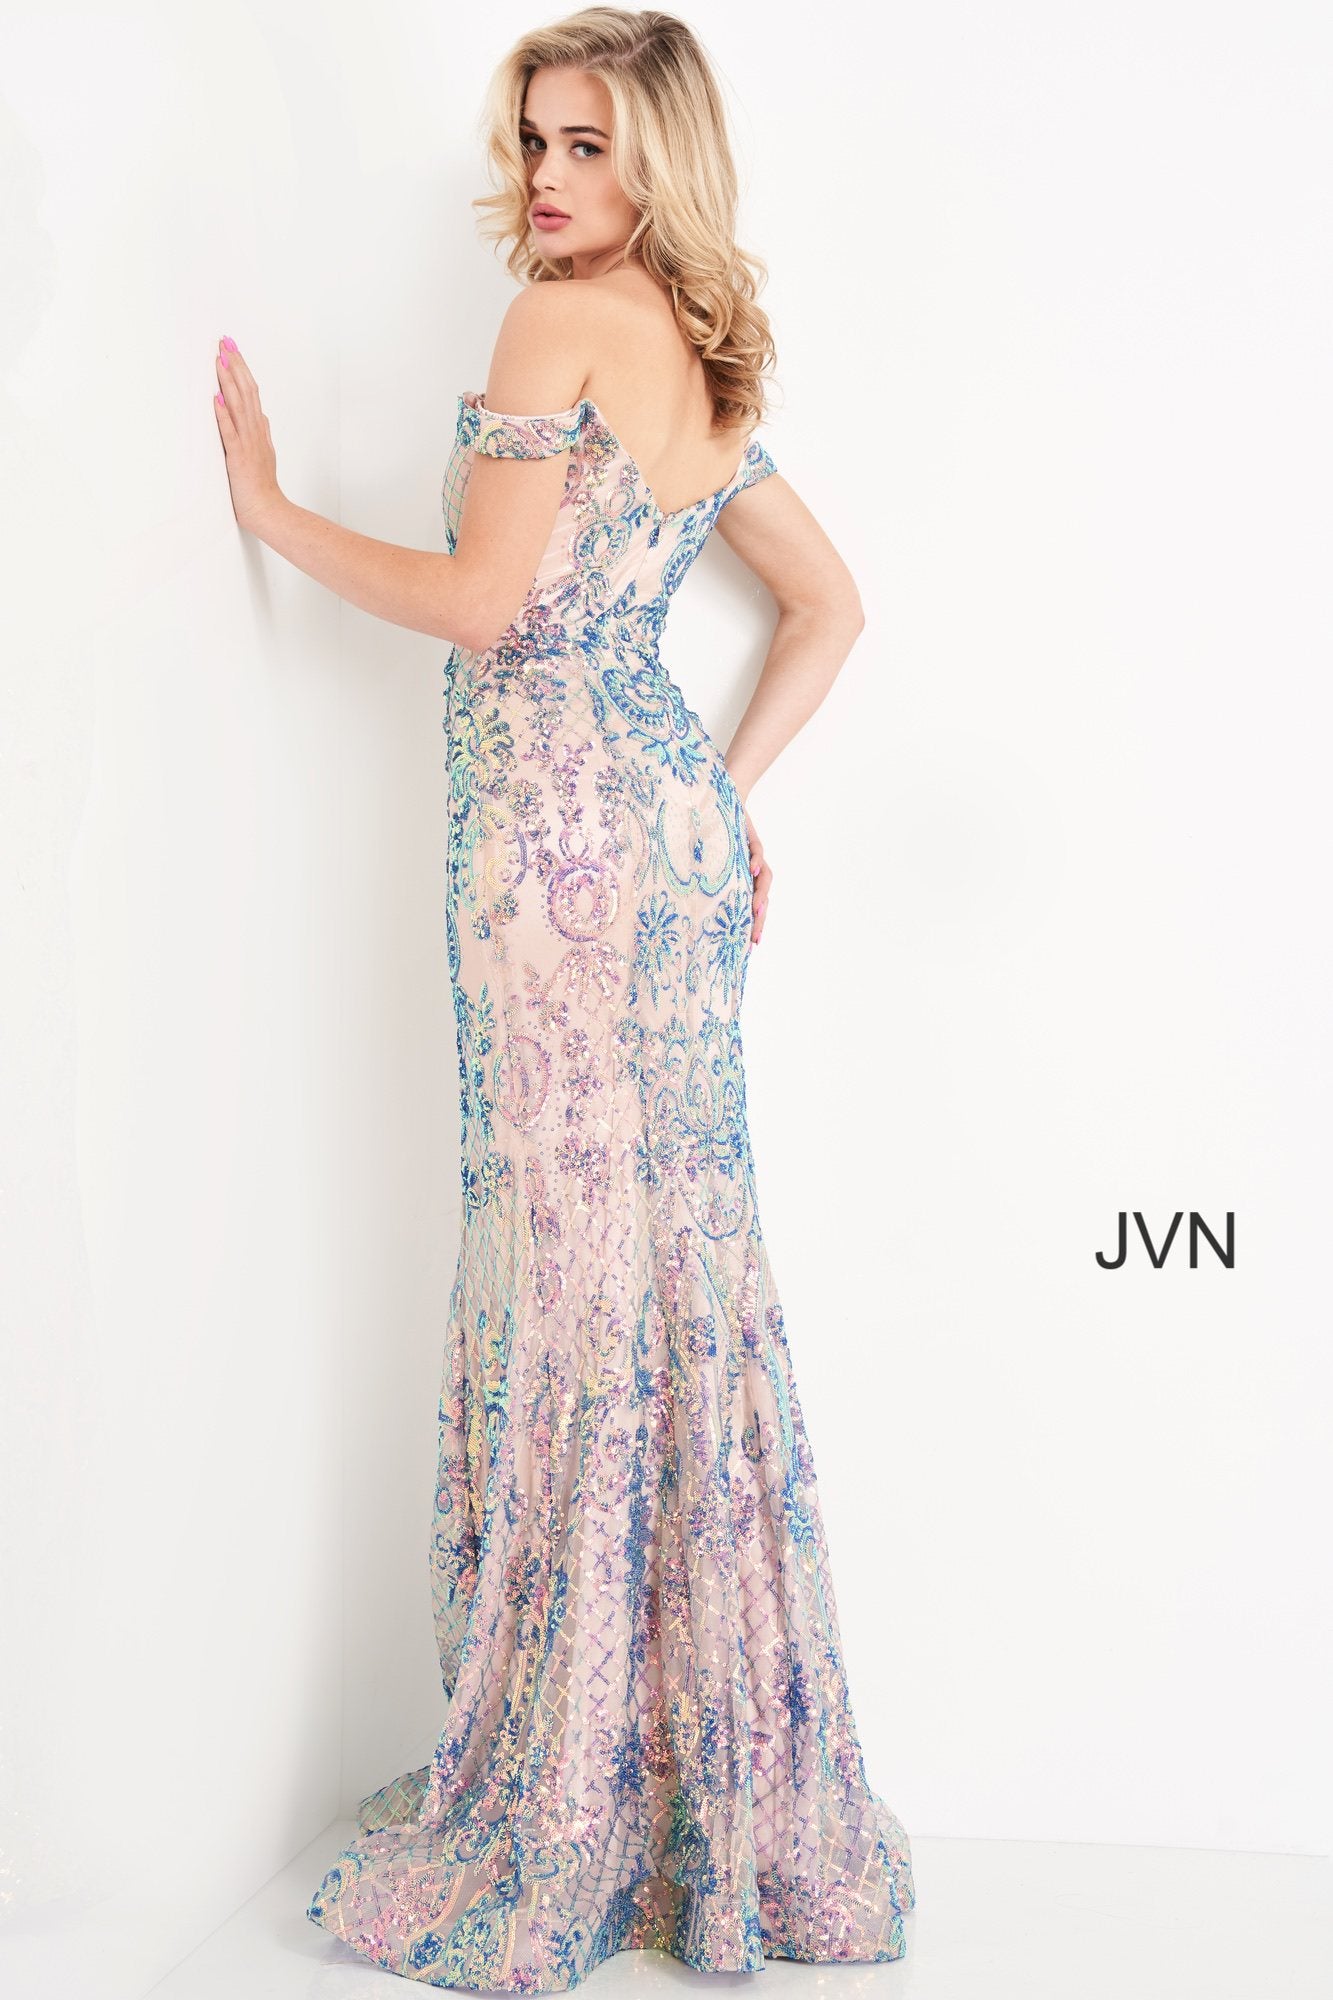 Jovani JVN04515 is an over the top 2021 Prom Formal Wear Style! This Glamorous Pageant Gown Features off the shoulder straps with a Plunging V Neckline. Fitted Mermaid Silhouette Cascades into a subtle lush trumpet skirt. Elaborate Multi Color Sequin Pattern form a damask print and add a Glamorous appeal. This gown is for those who want to be seen! Great for Plus Size! Great sexy wedding reception dress in ivory! JVN 04515  Ivory  Size 8